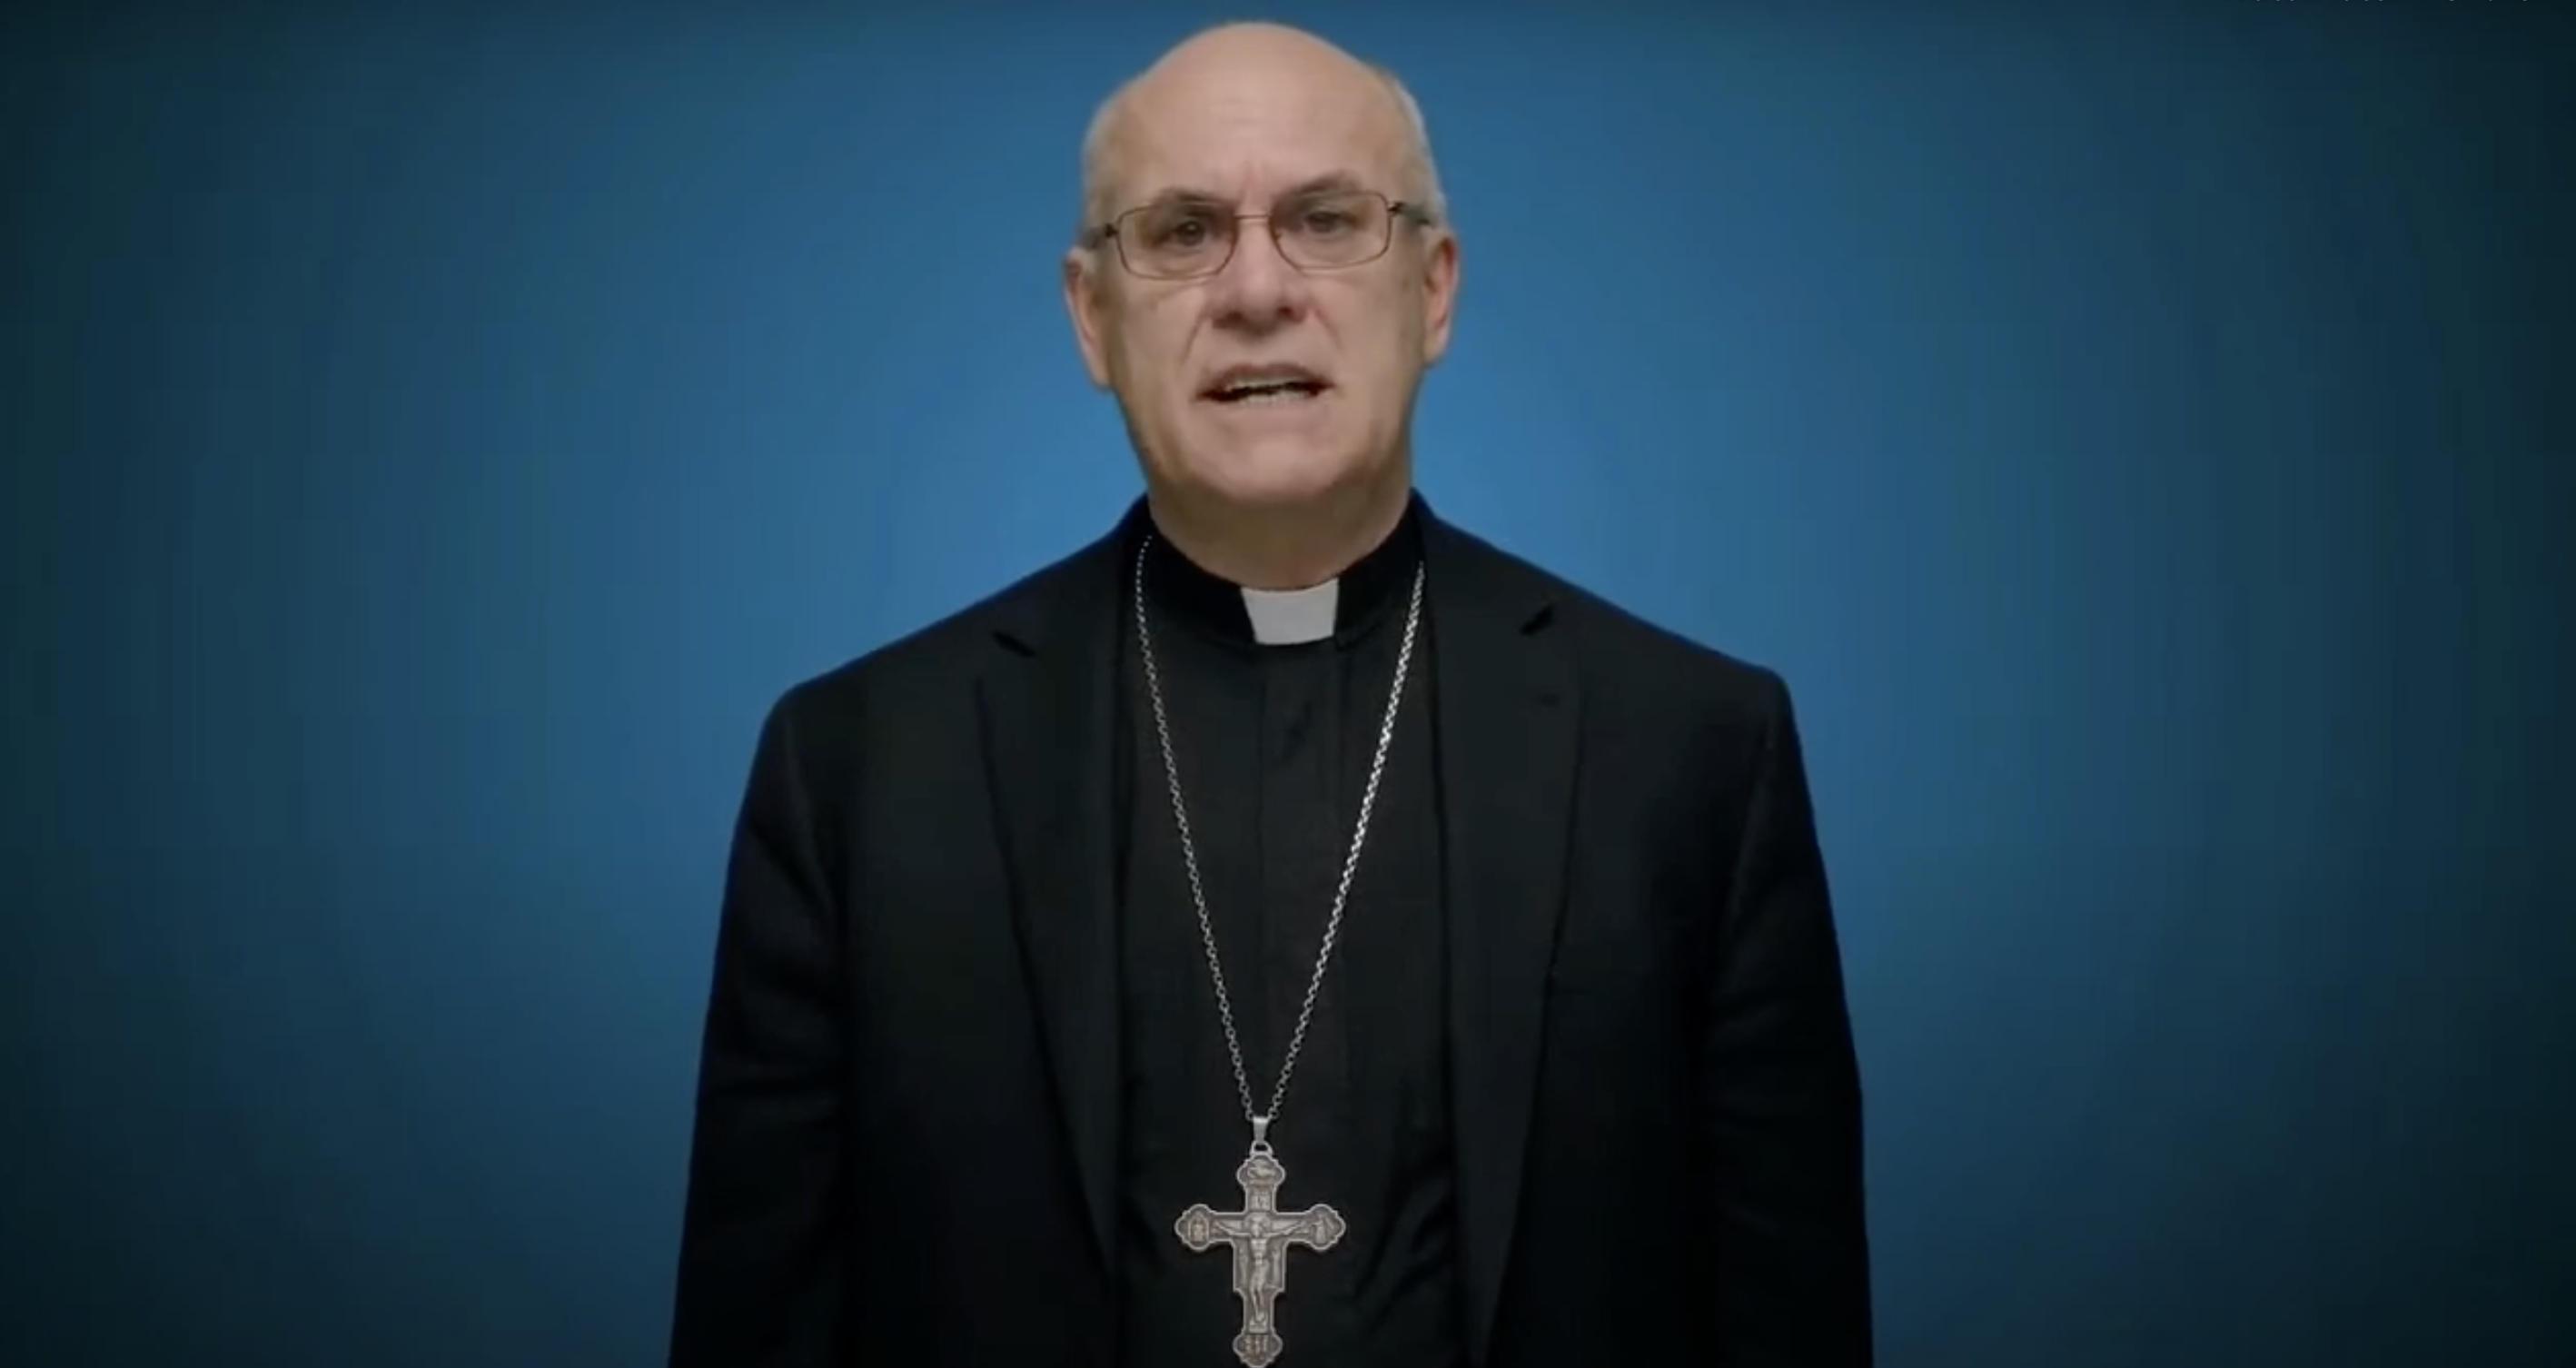 Bishop Kevin Rhoades of Fort Wayne-South Bend, Indiana, chair of the U.S. Conference of Catholic Bishops’ Committee on Doctrine. Screen grab courtesy of USCCB livestream.